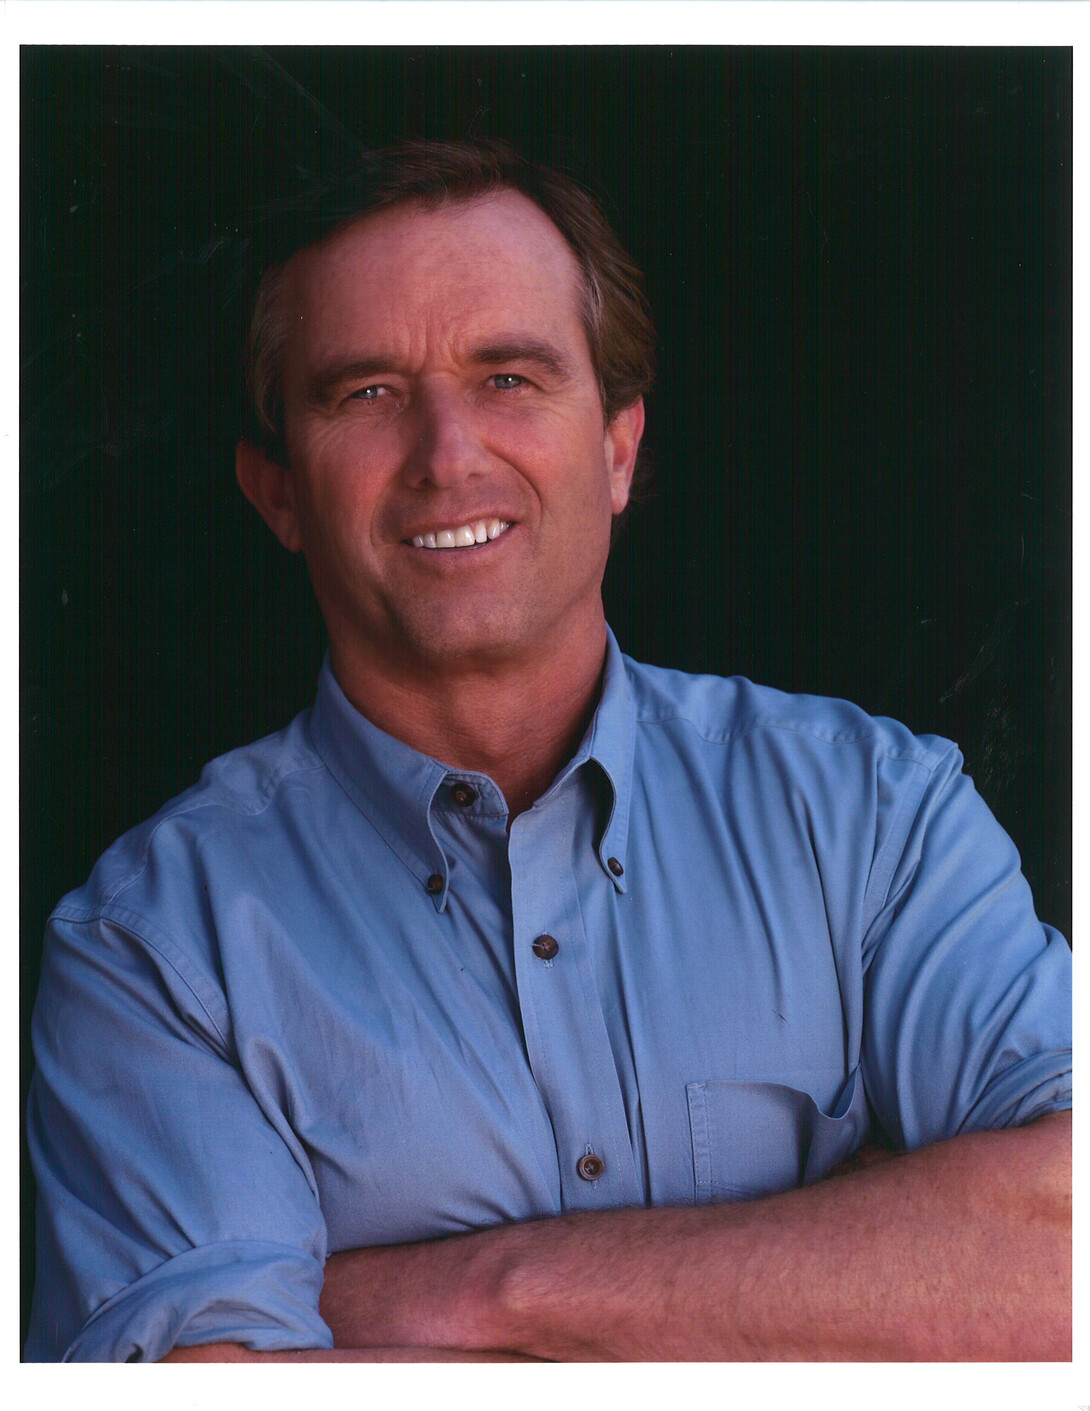 Robert F. Kennedy Jr. will deliver the May 9 commencement address at the UNL College of Law.